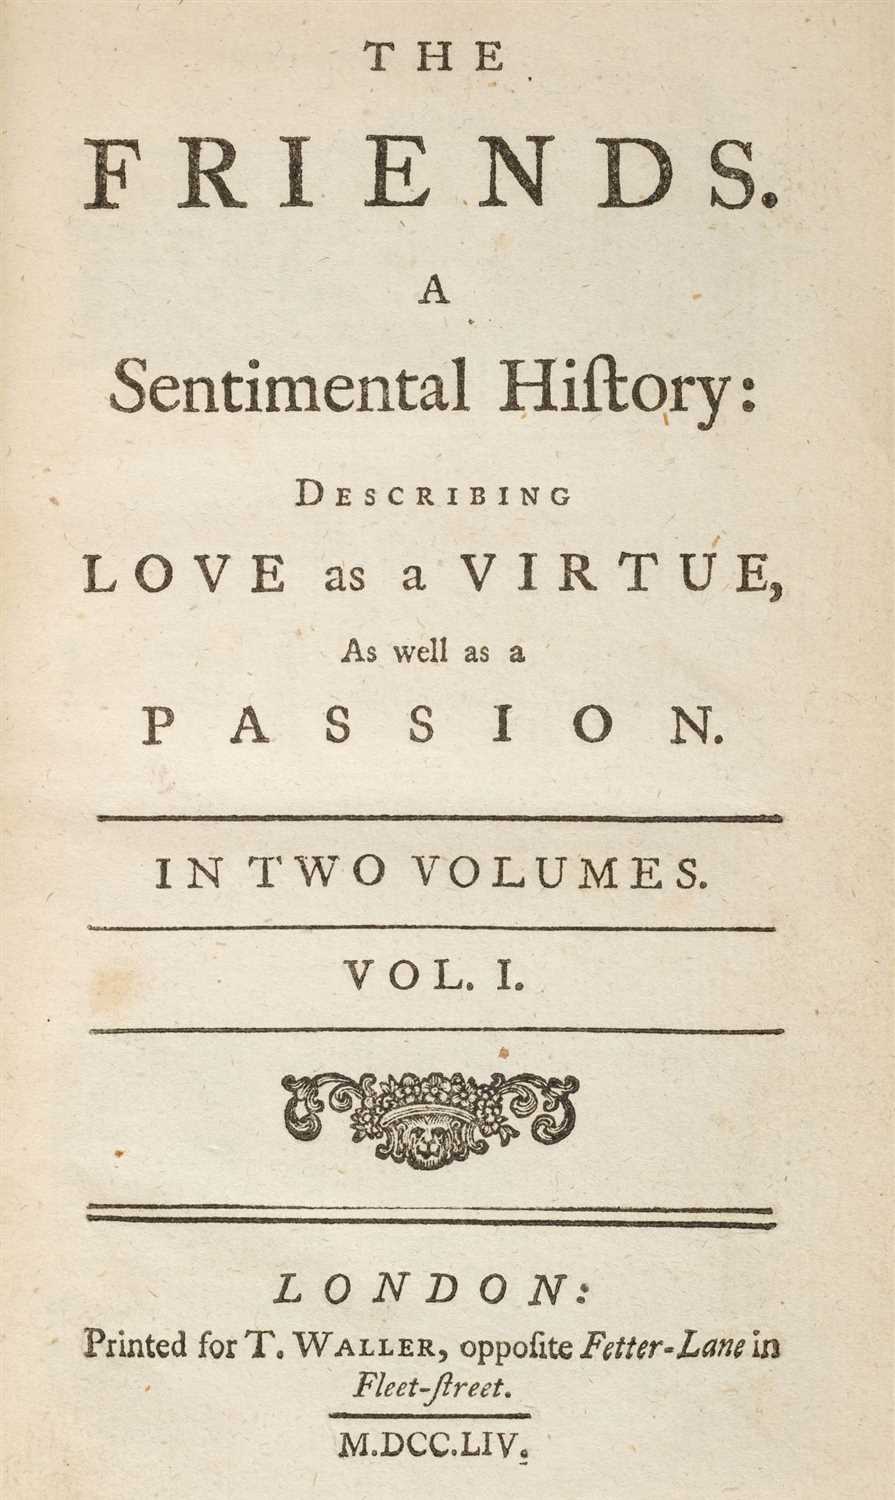 Lot 212 - Guthrie (William). The Friends. A Sentimental History, 1754